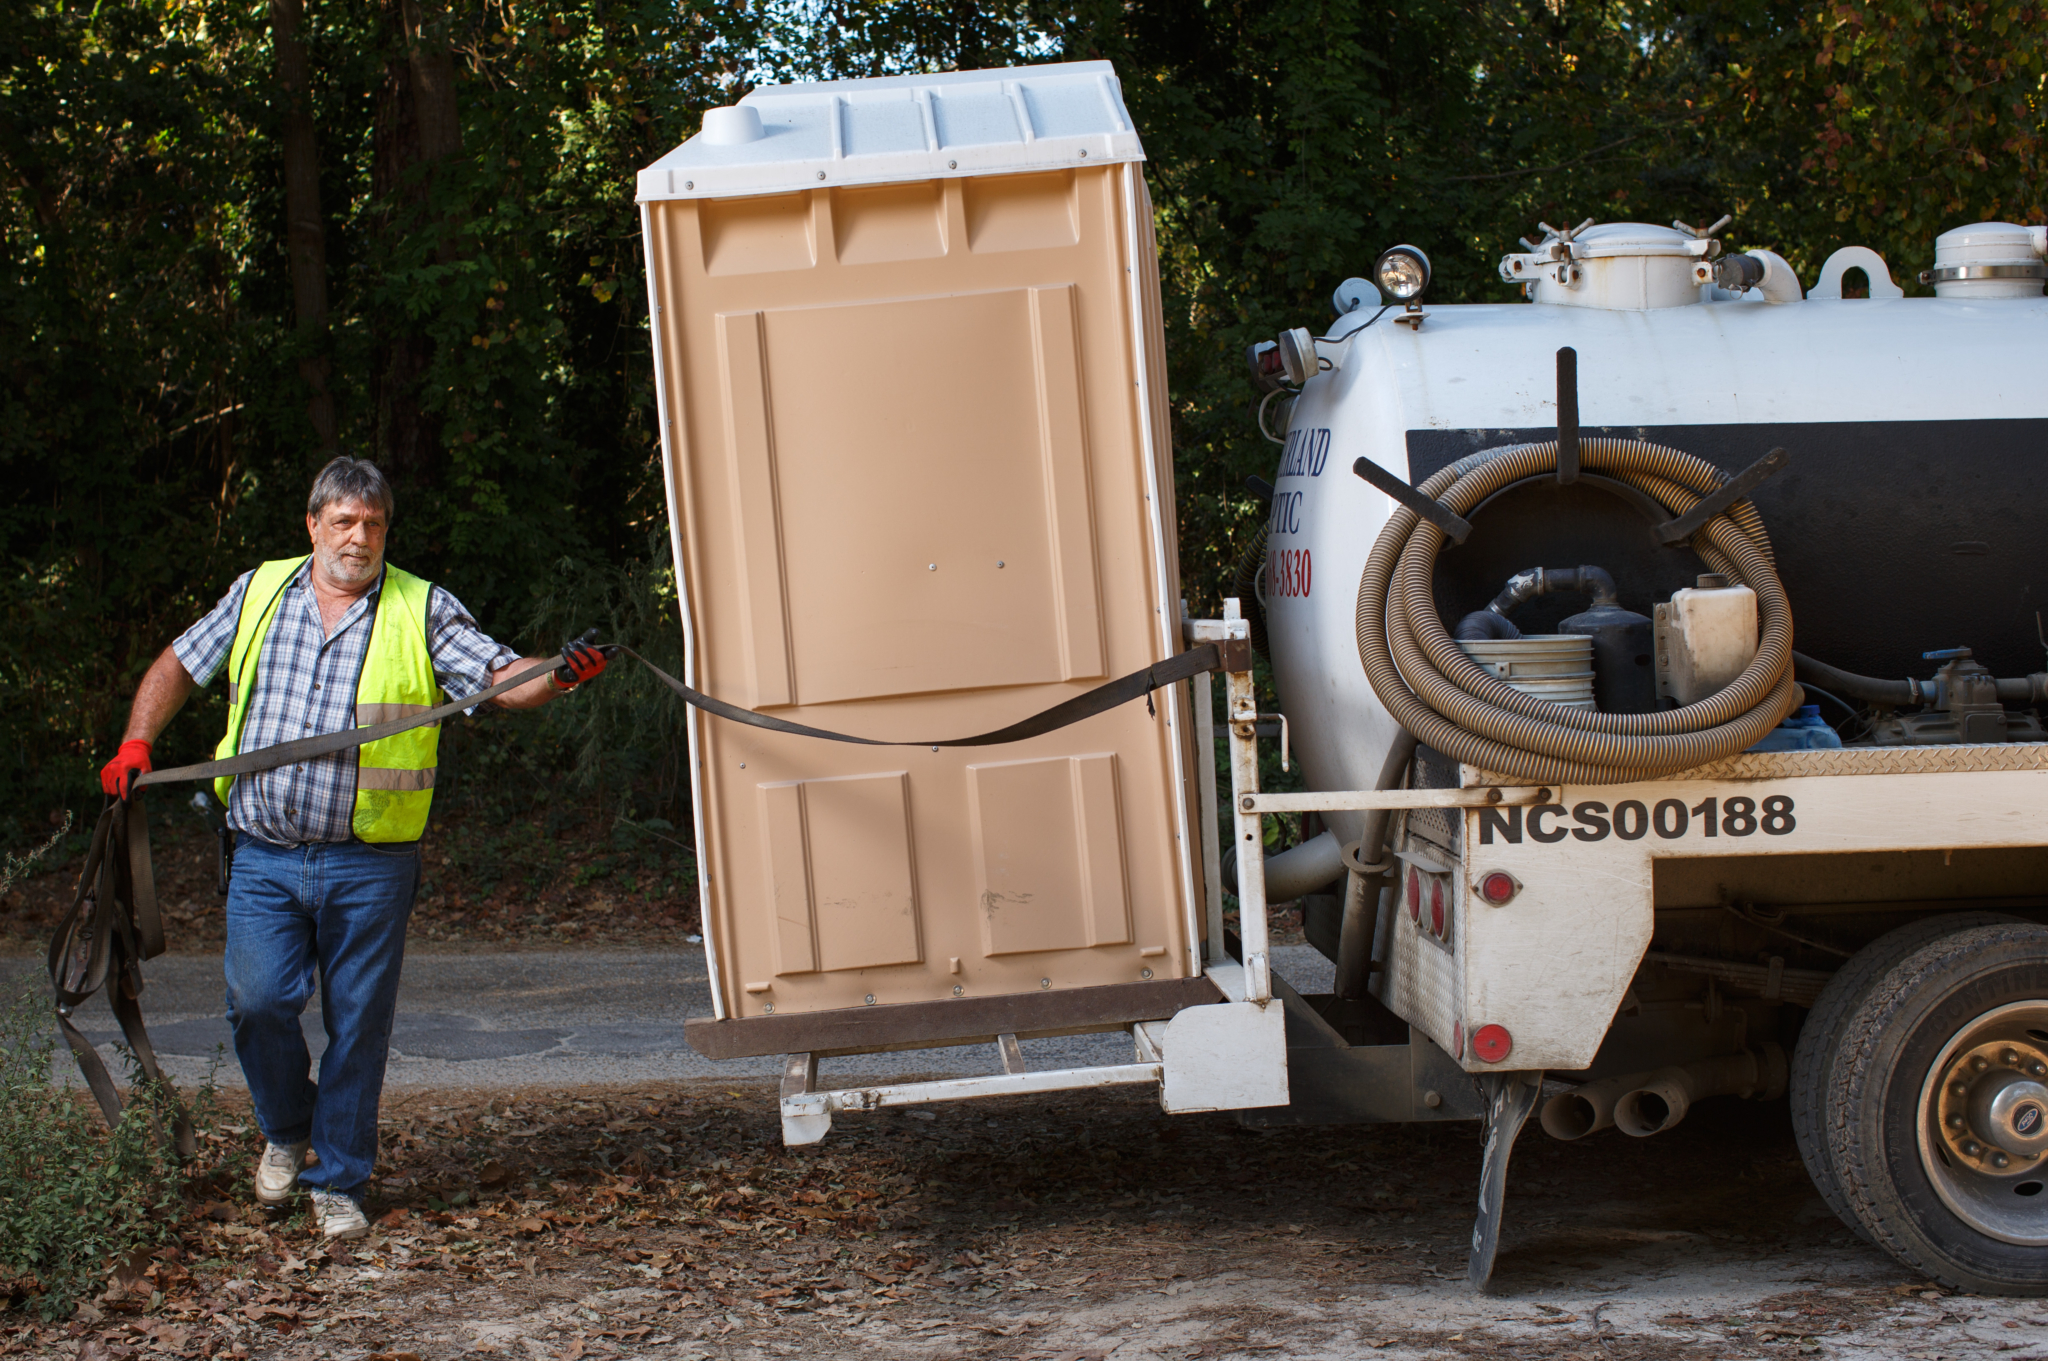 Faced with 46,000 additions to the city sewer, Mike and Audrey Stancil pivoted to portable restroom service.